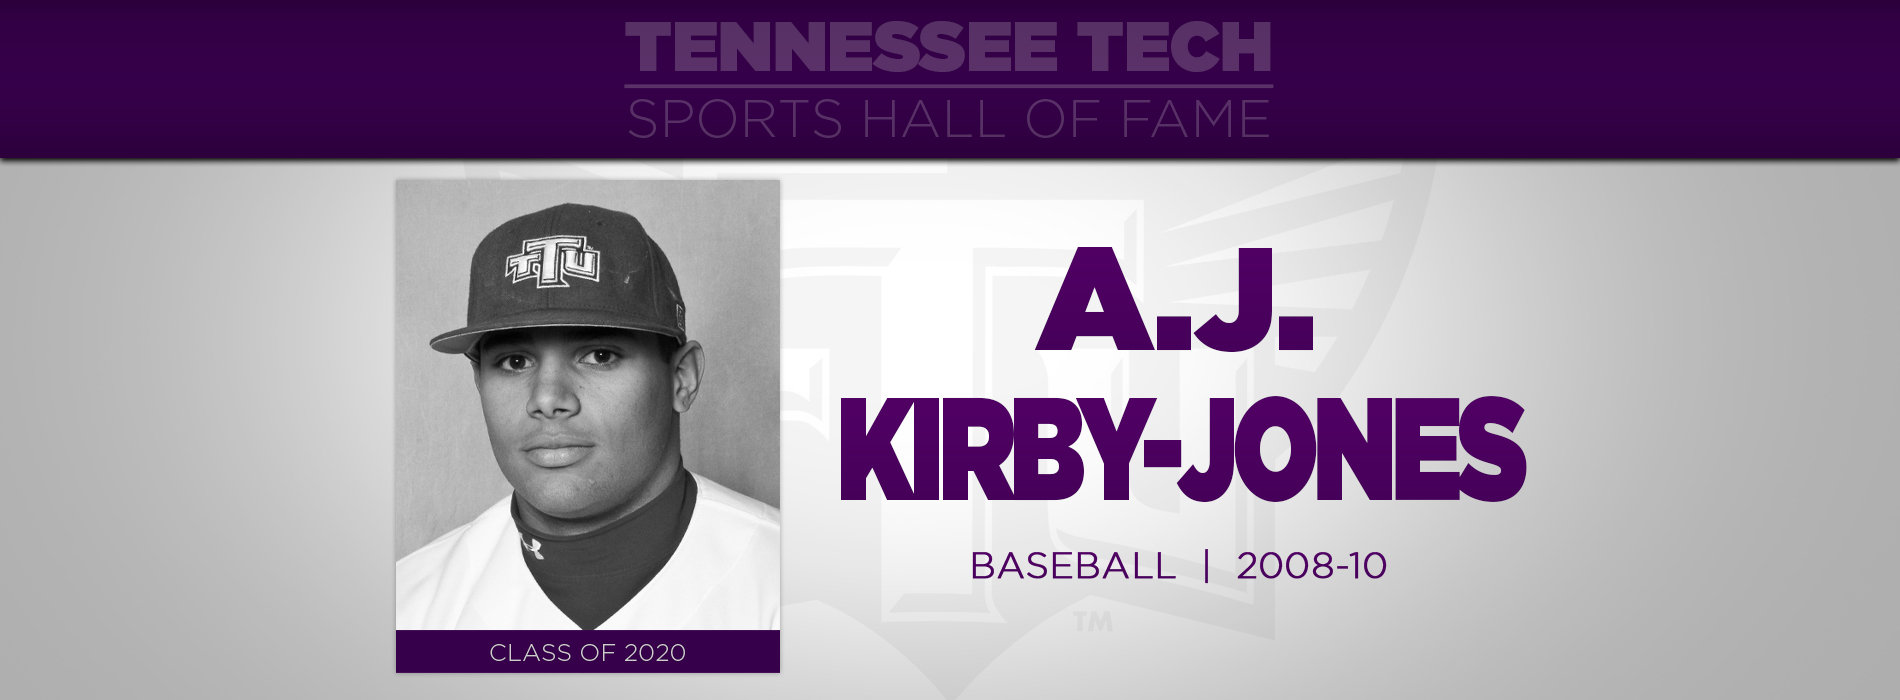 Slugger Kirby-Jones to be inducted into TTU Sports Hall of Fame Friday, Nov. 12